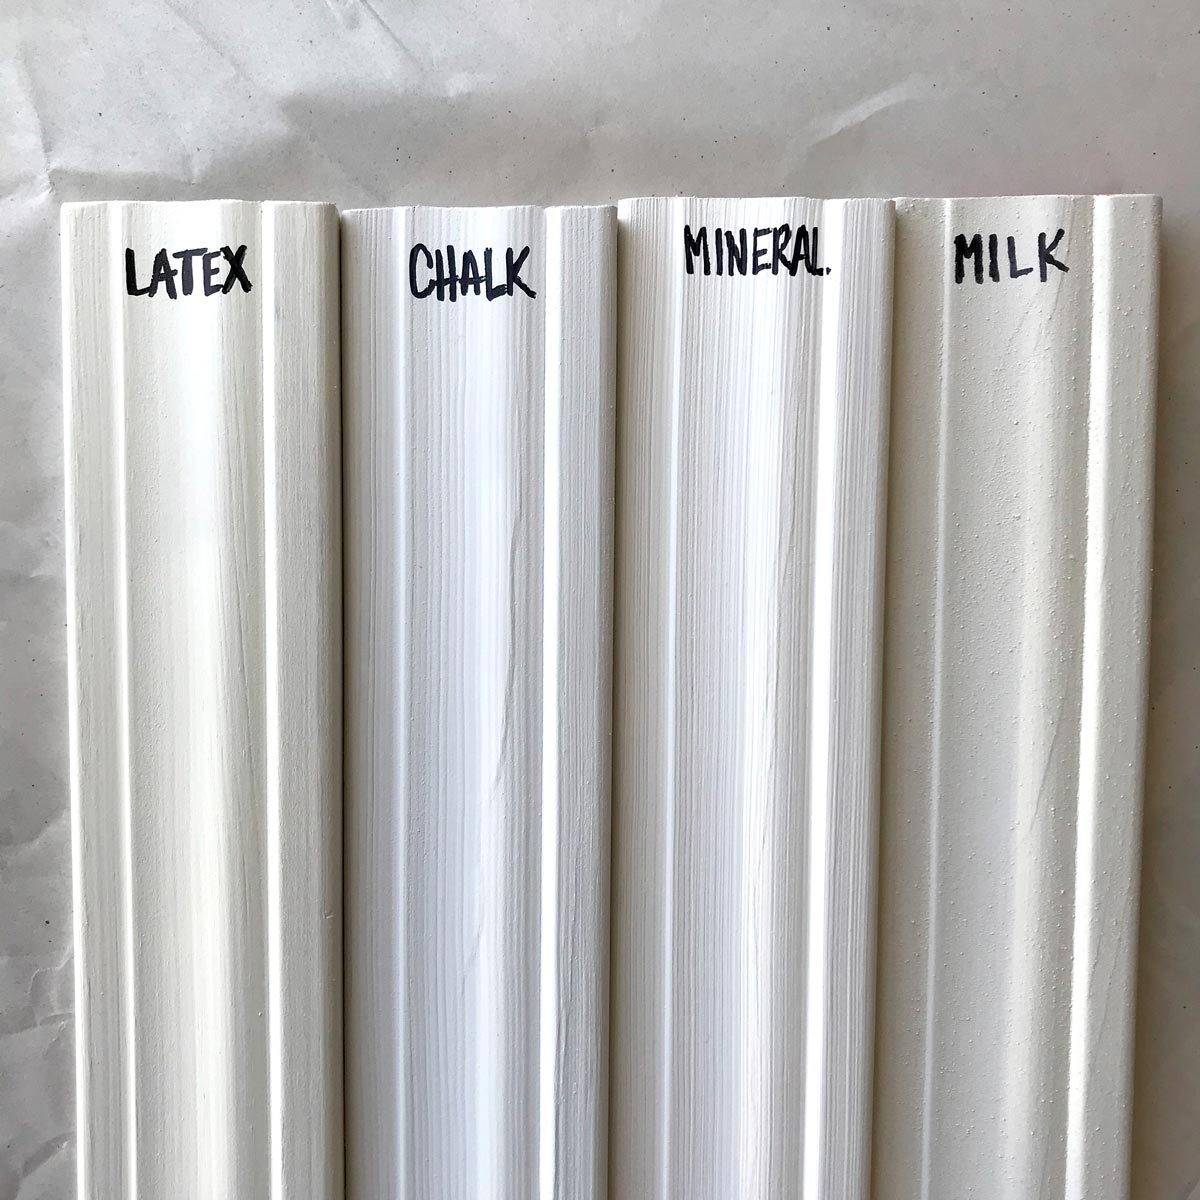 Compare Chalk Milk Mineral And Latex Paint